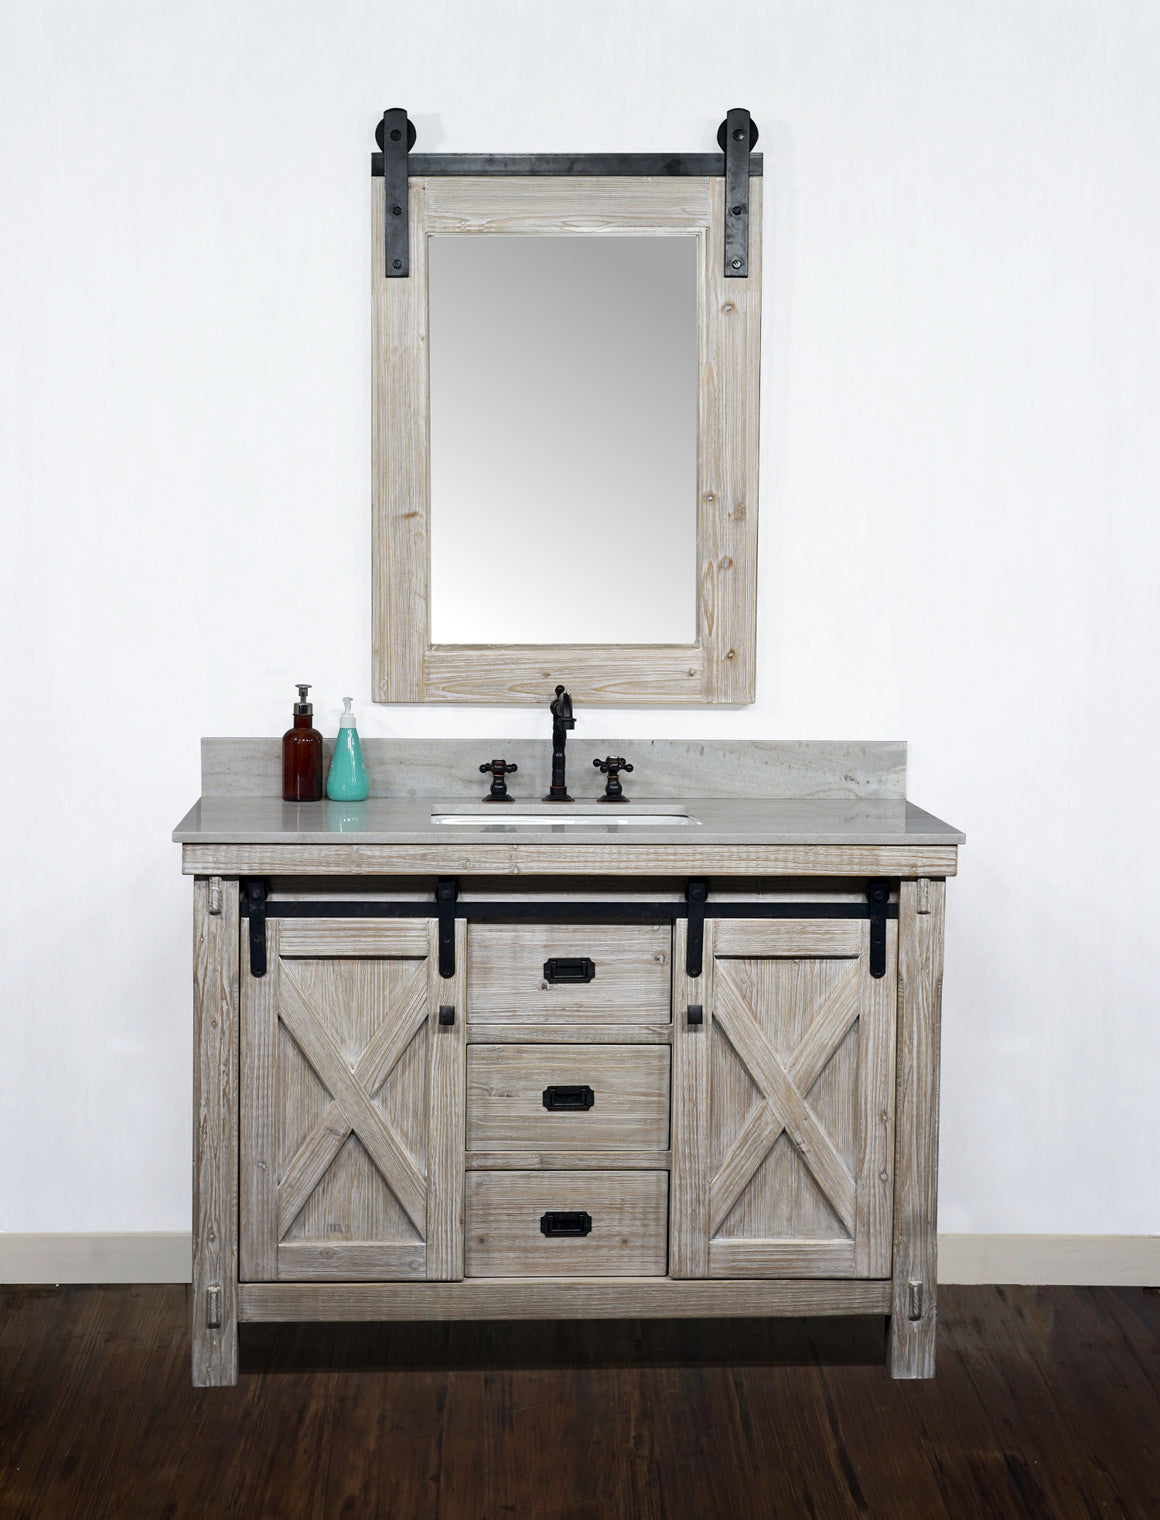 48"RUSTIC SOLID FIR BARN DOOR STYLE SINGLE SINK VANITY WITH COASTAL SANDS MARBLE TOP WITH RECTANGULAR SINK-NO FAUCET